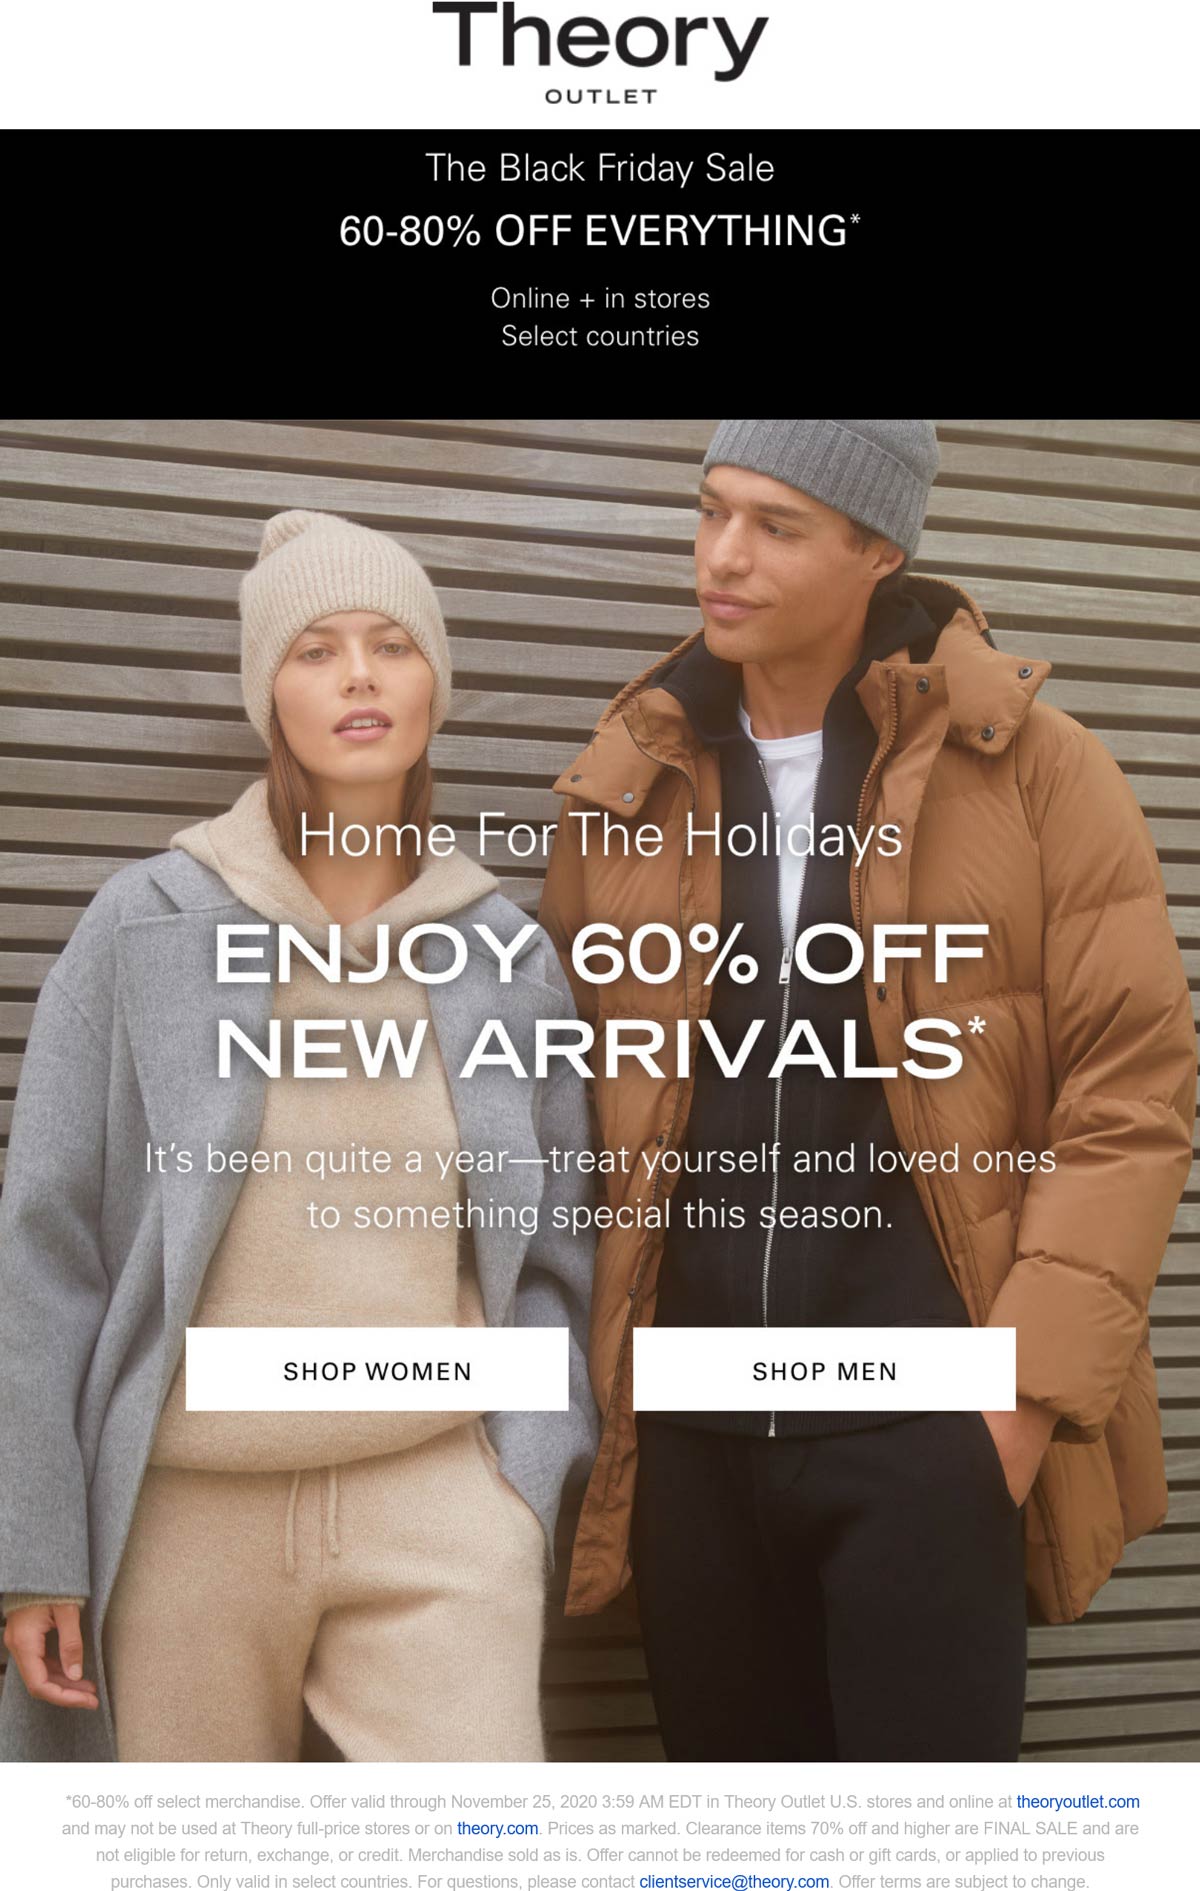 6080 off everything at Theory Outlet, ditto online theoryoutlet